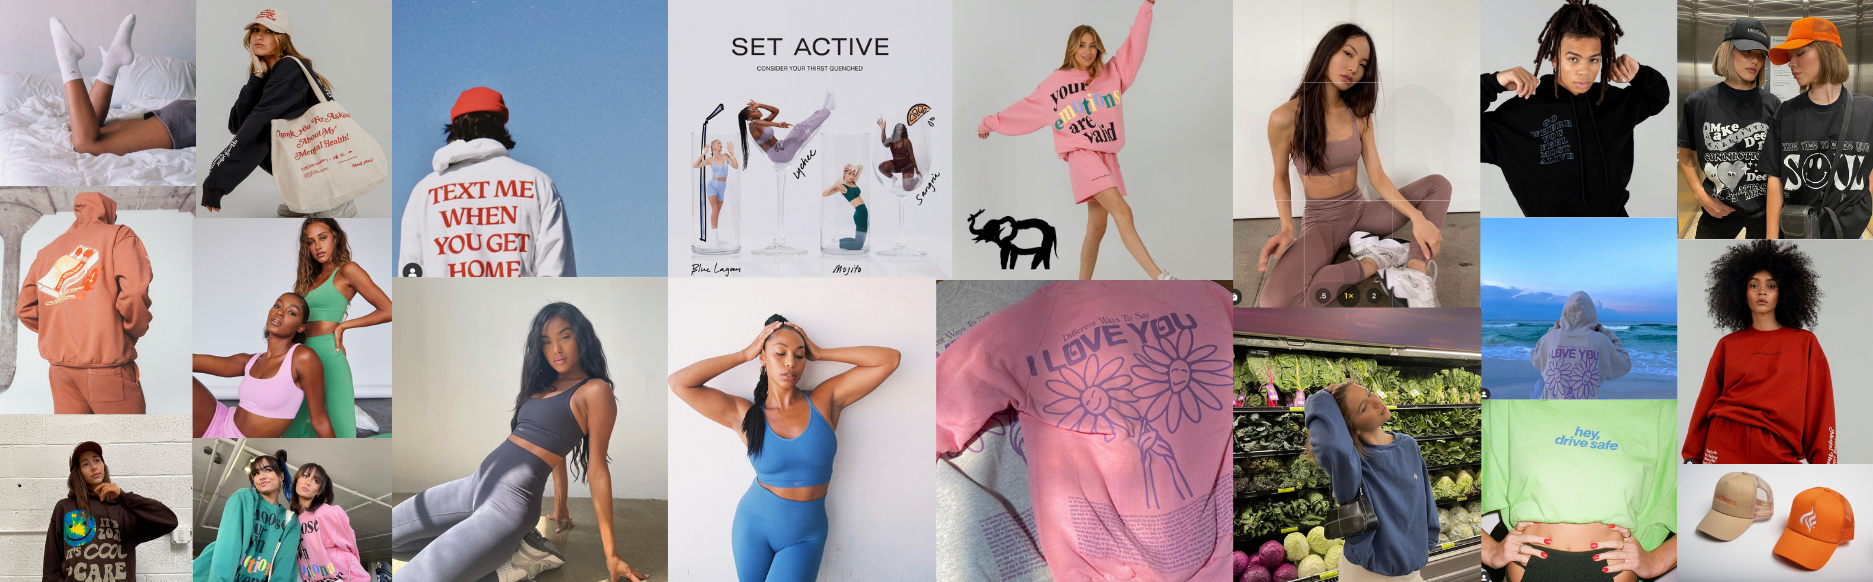 Instagram and Sweatpants: Social Media as Marketing Strategy